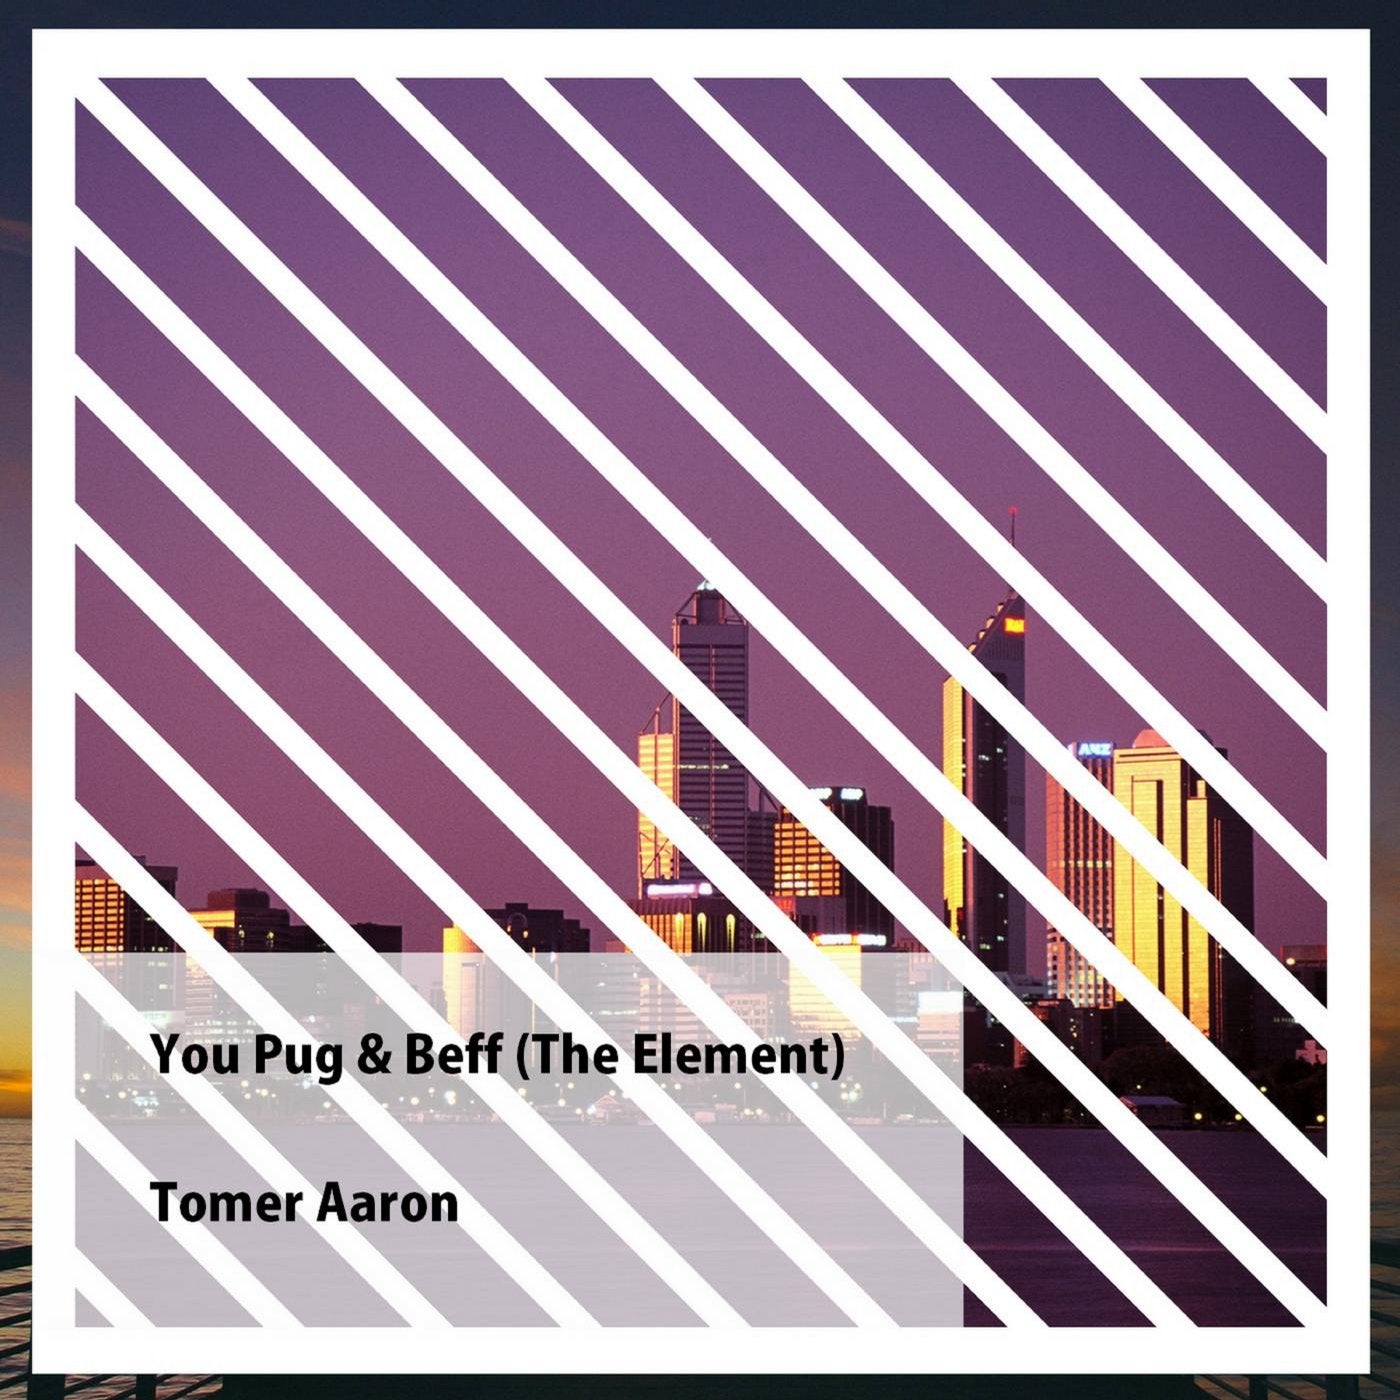 You Pug & Beff (The Element)